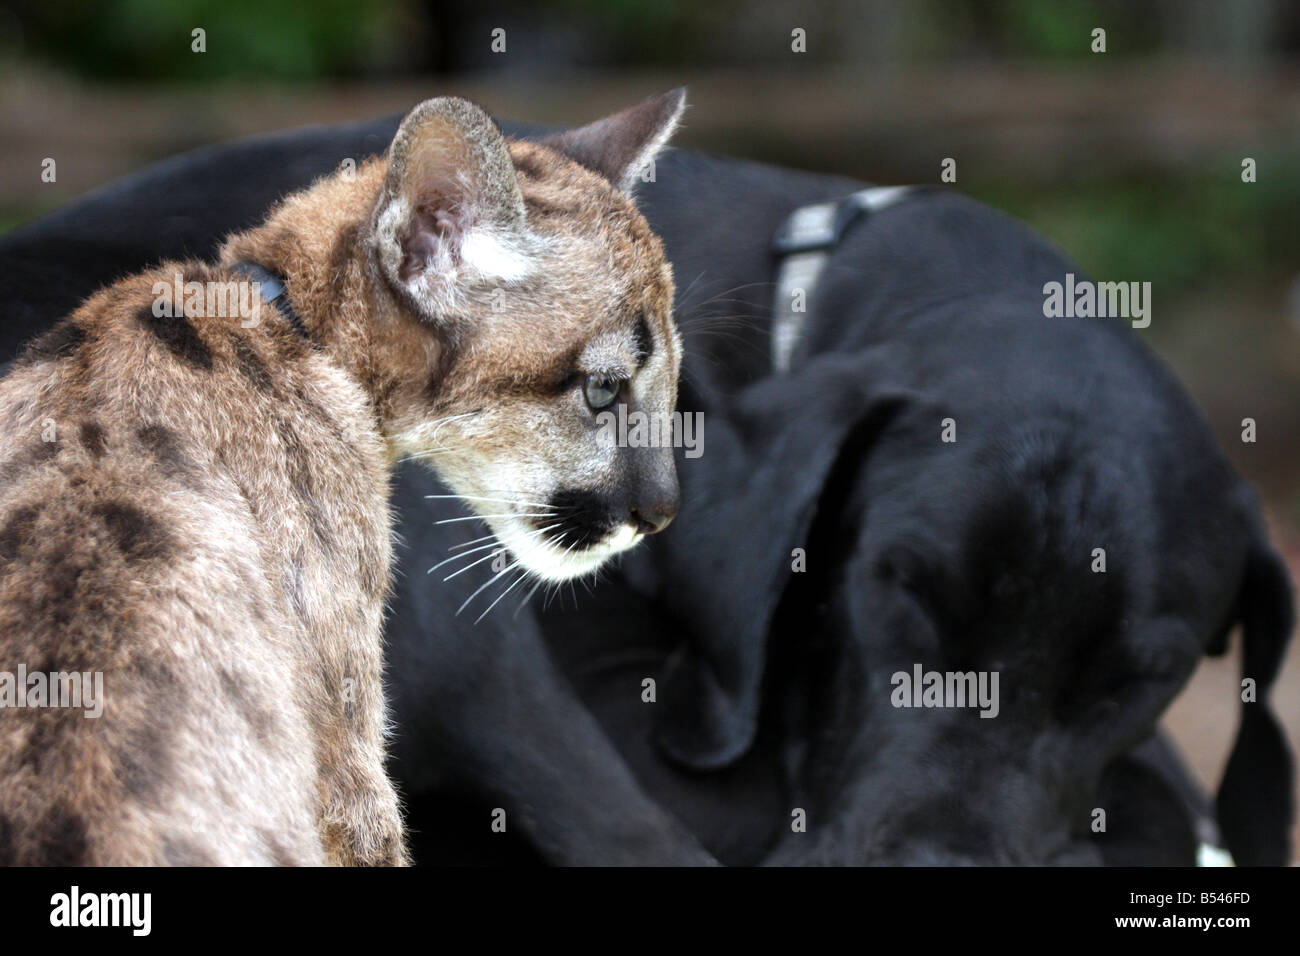 A baby cougar or Mountain Lion in front of a sleeping Great Dane Dog at the DeYoung Family Zoo Michigan. Pals Stock Photo